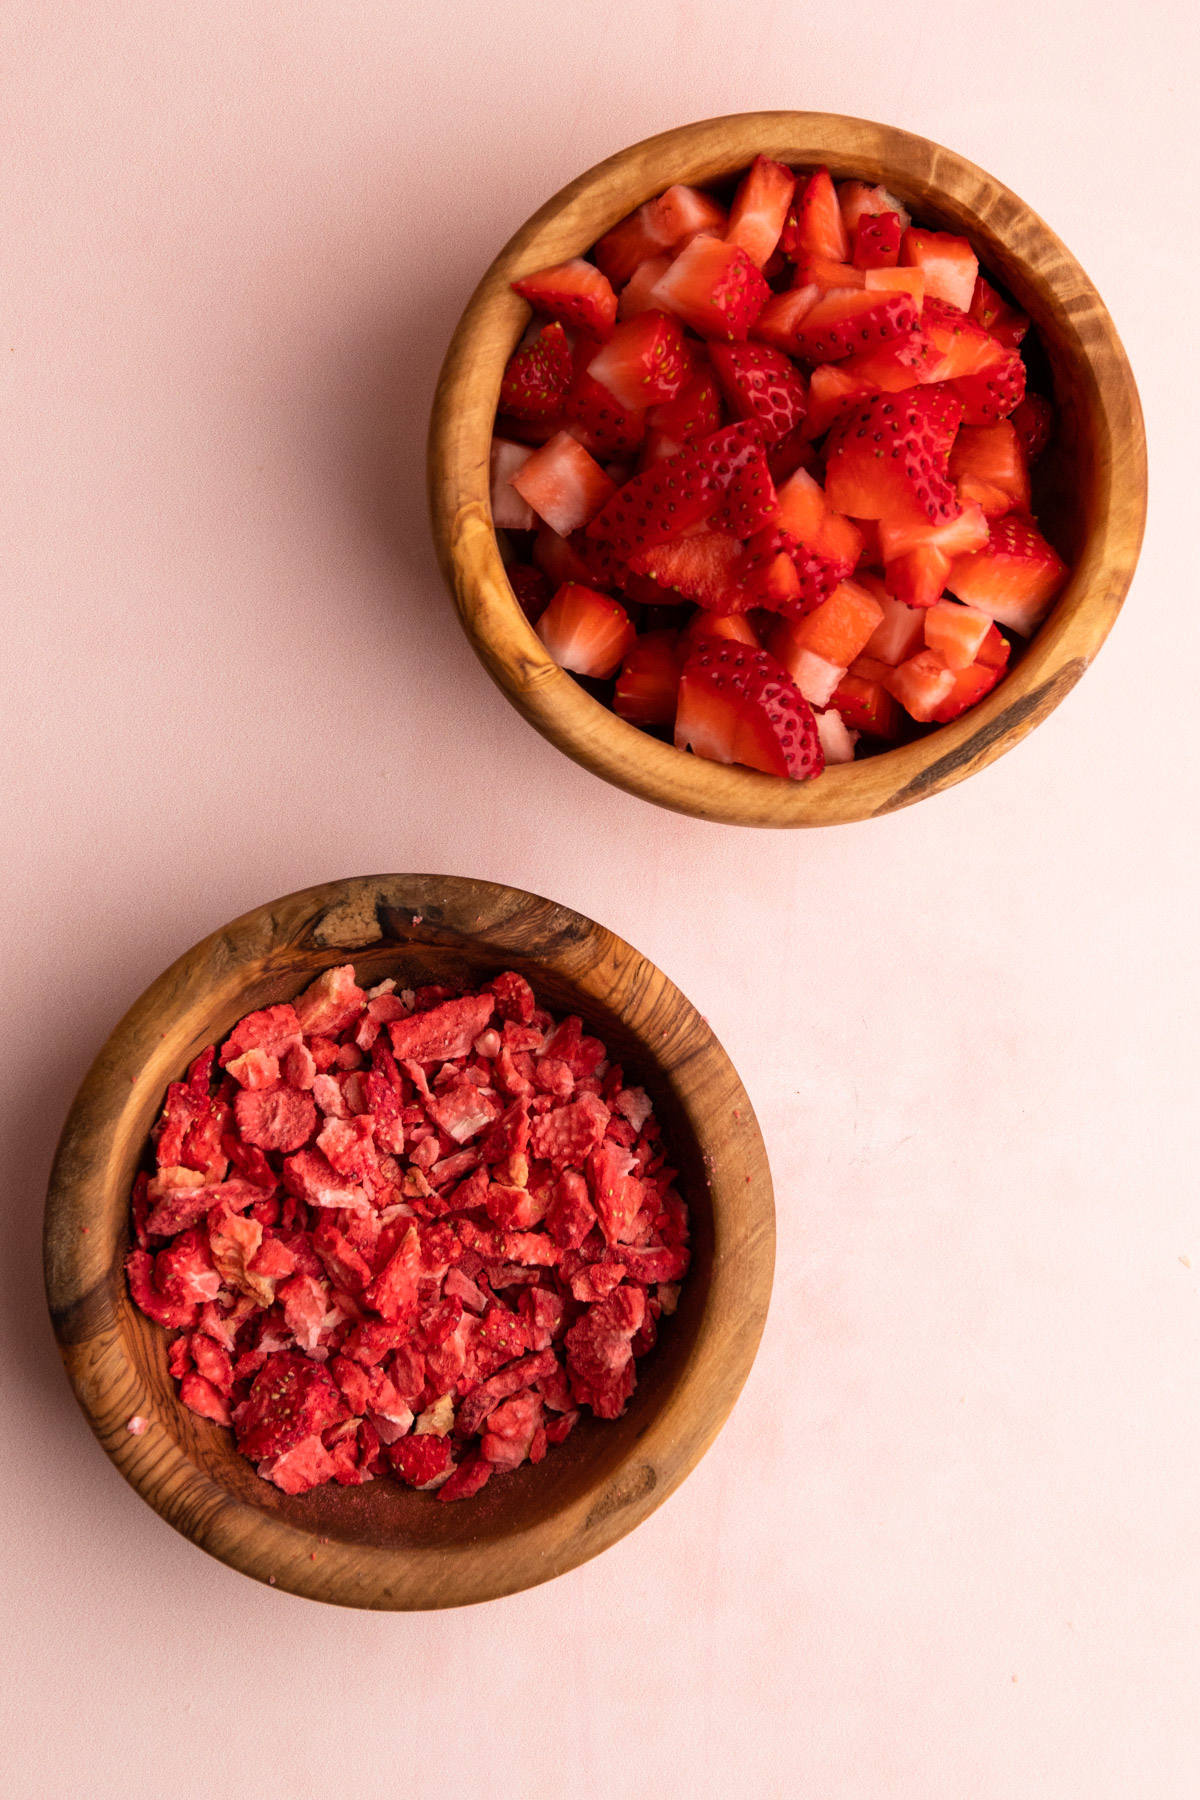 A bowl of fresh strawberries and a bowl of freeze-dried strawberries for strawberry muffins.